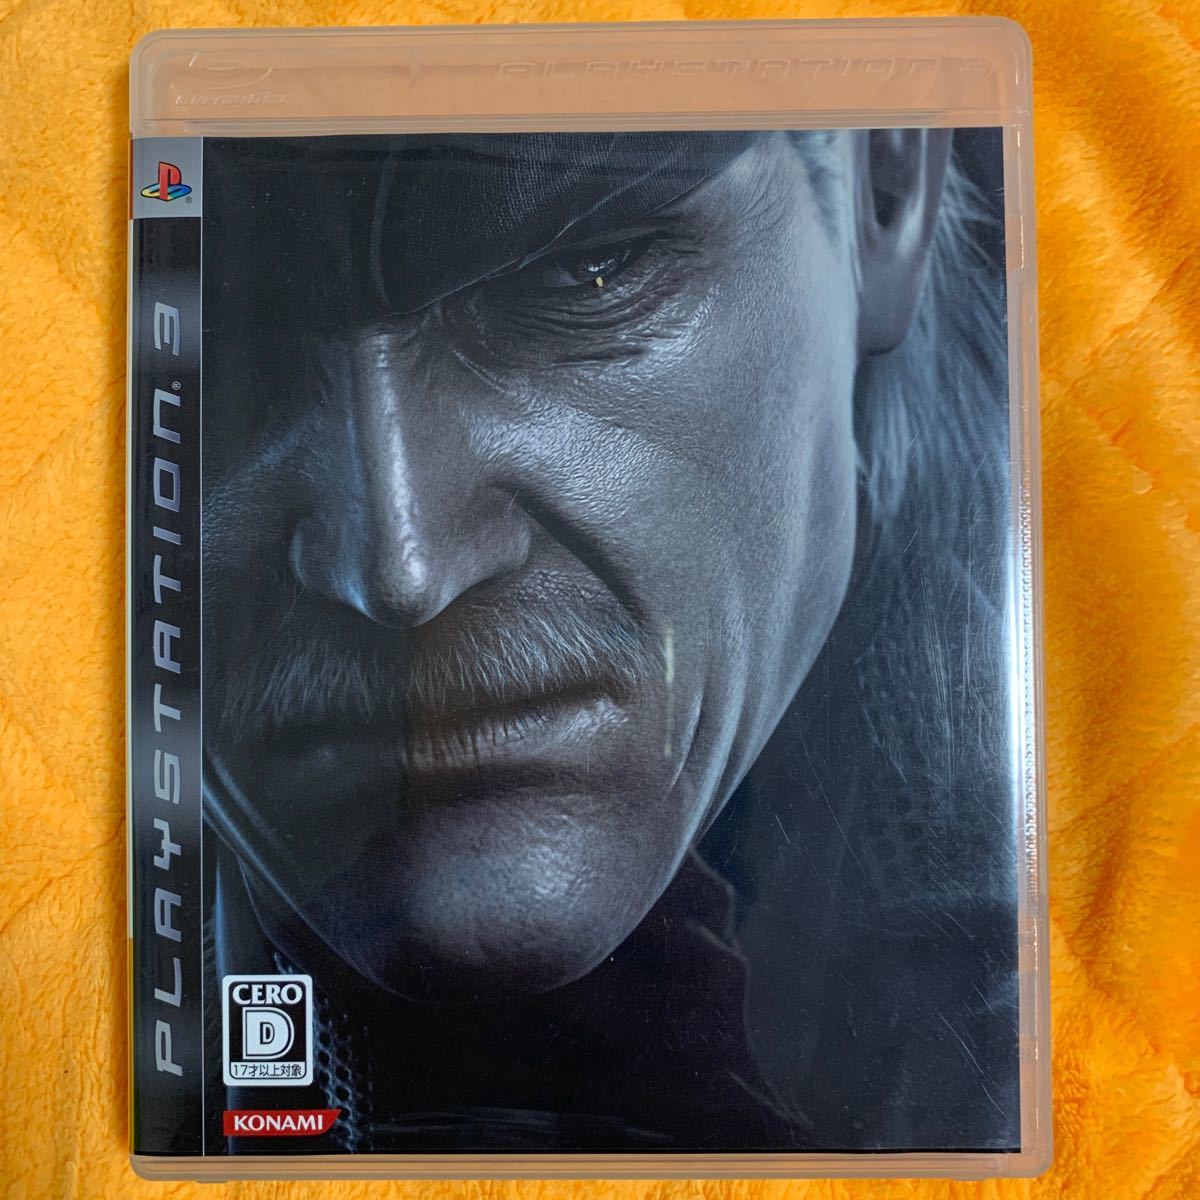 【PS3】 METAL GEAR SOLID 4 GUNS OF THE PATRIOTS [通常版］